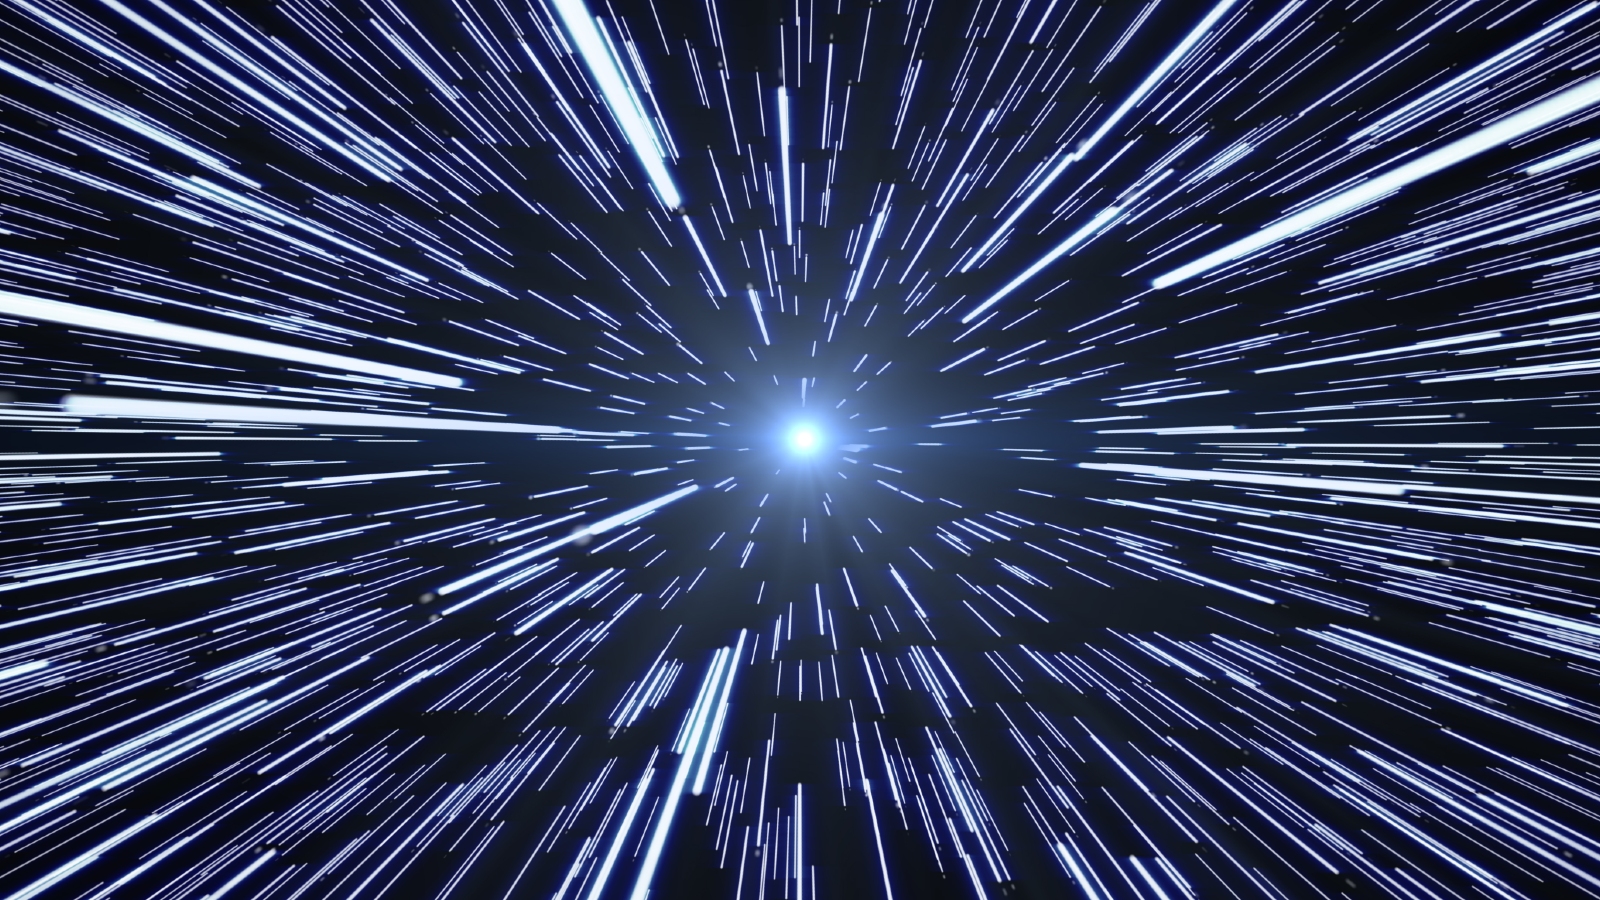  Alien 'warp drives' may leave telltale signals in the fabric of space-time, new paper claims 